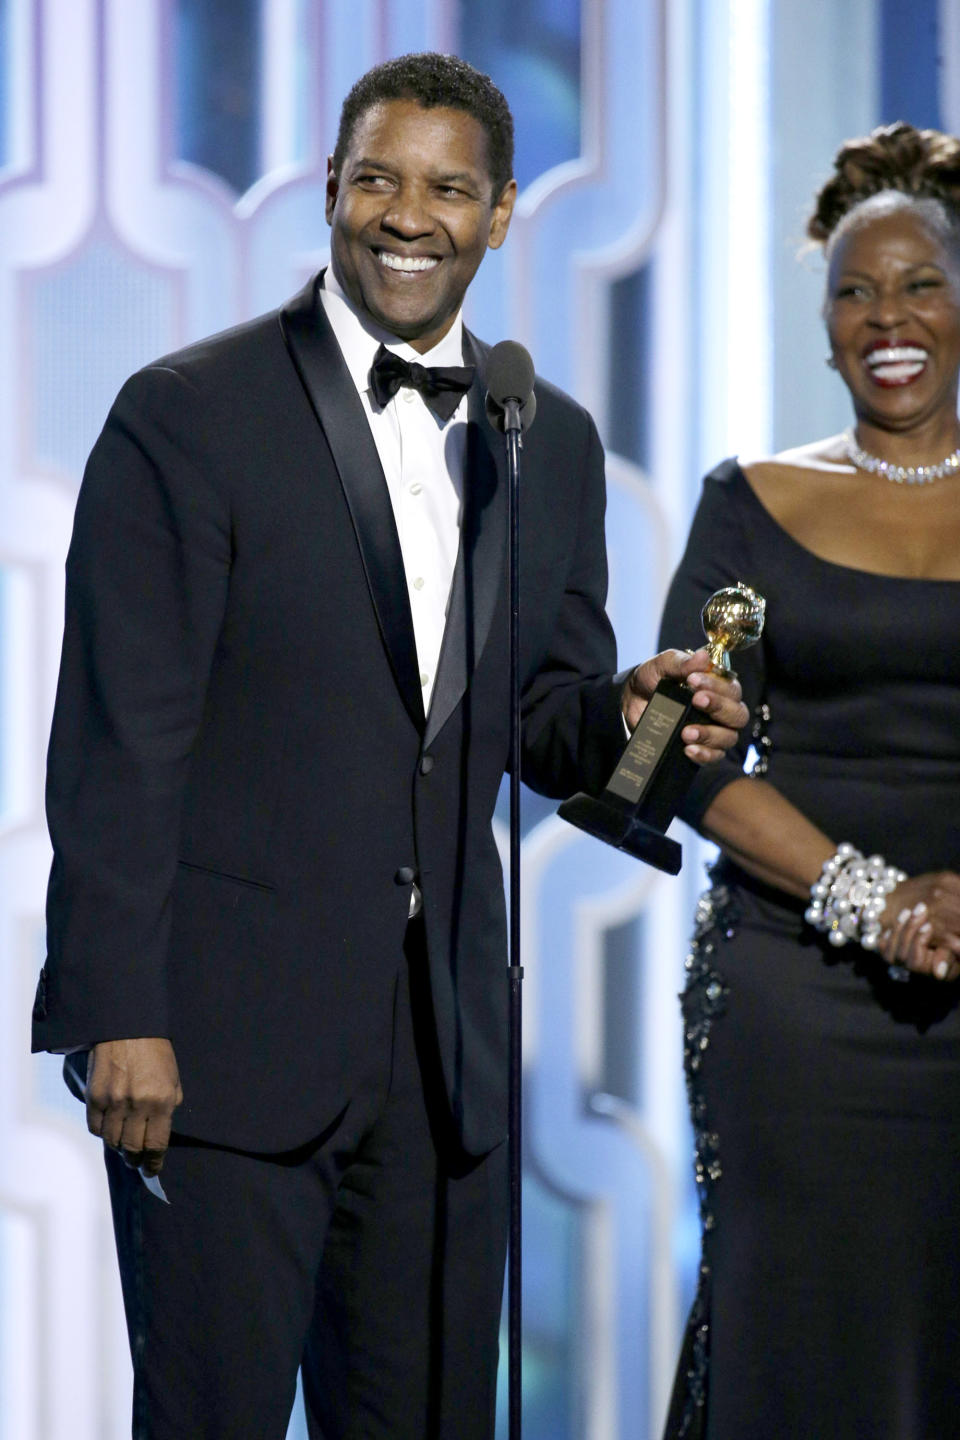 BEVERLY HILLS, CA - JANUARY 10: In this handout photo provided by NBCUniversal,  Denzel Washington accepts with Cecil B. Demille Award during the 73rd Annual Golden Globe Awards at The Beverly Hilton Hotel on January 10, 2016 in Beverly Hills, California.  (Photo by Paul Drinkwater/NBCUniversal via Getty Images)